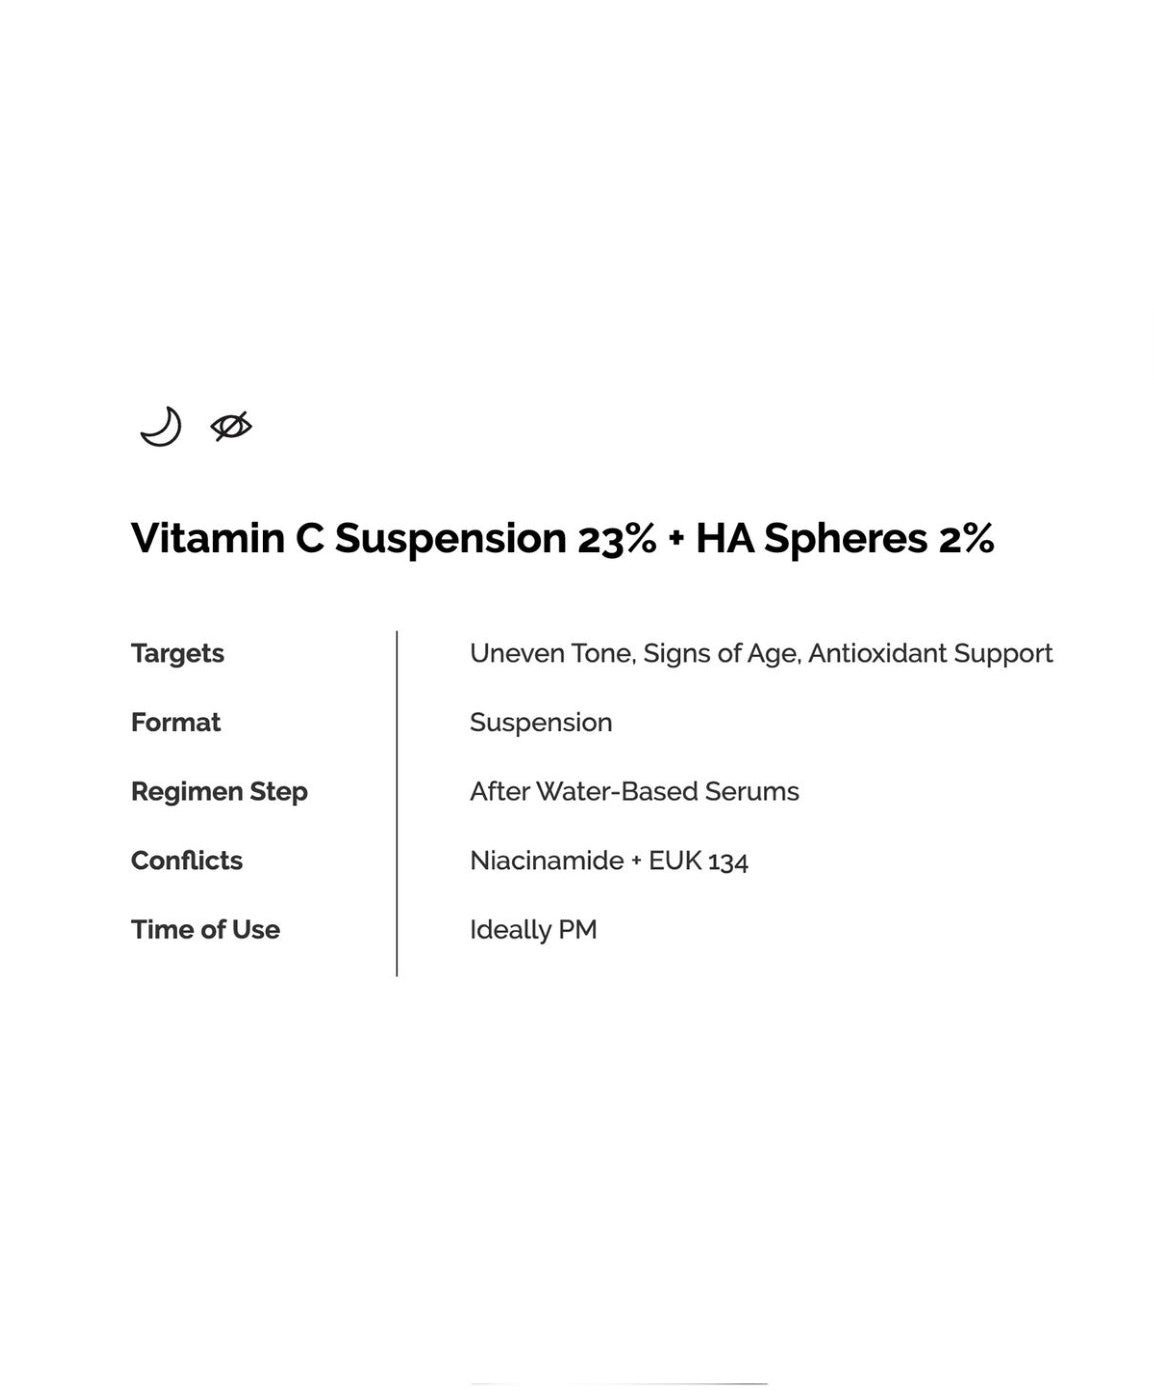 Vitamin C Suspension 23% + HA Spheres 2% by The Ordinary in UAE, Dubai and Abu Dhabi at Shopey